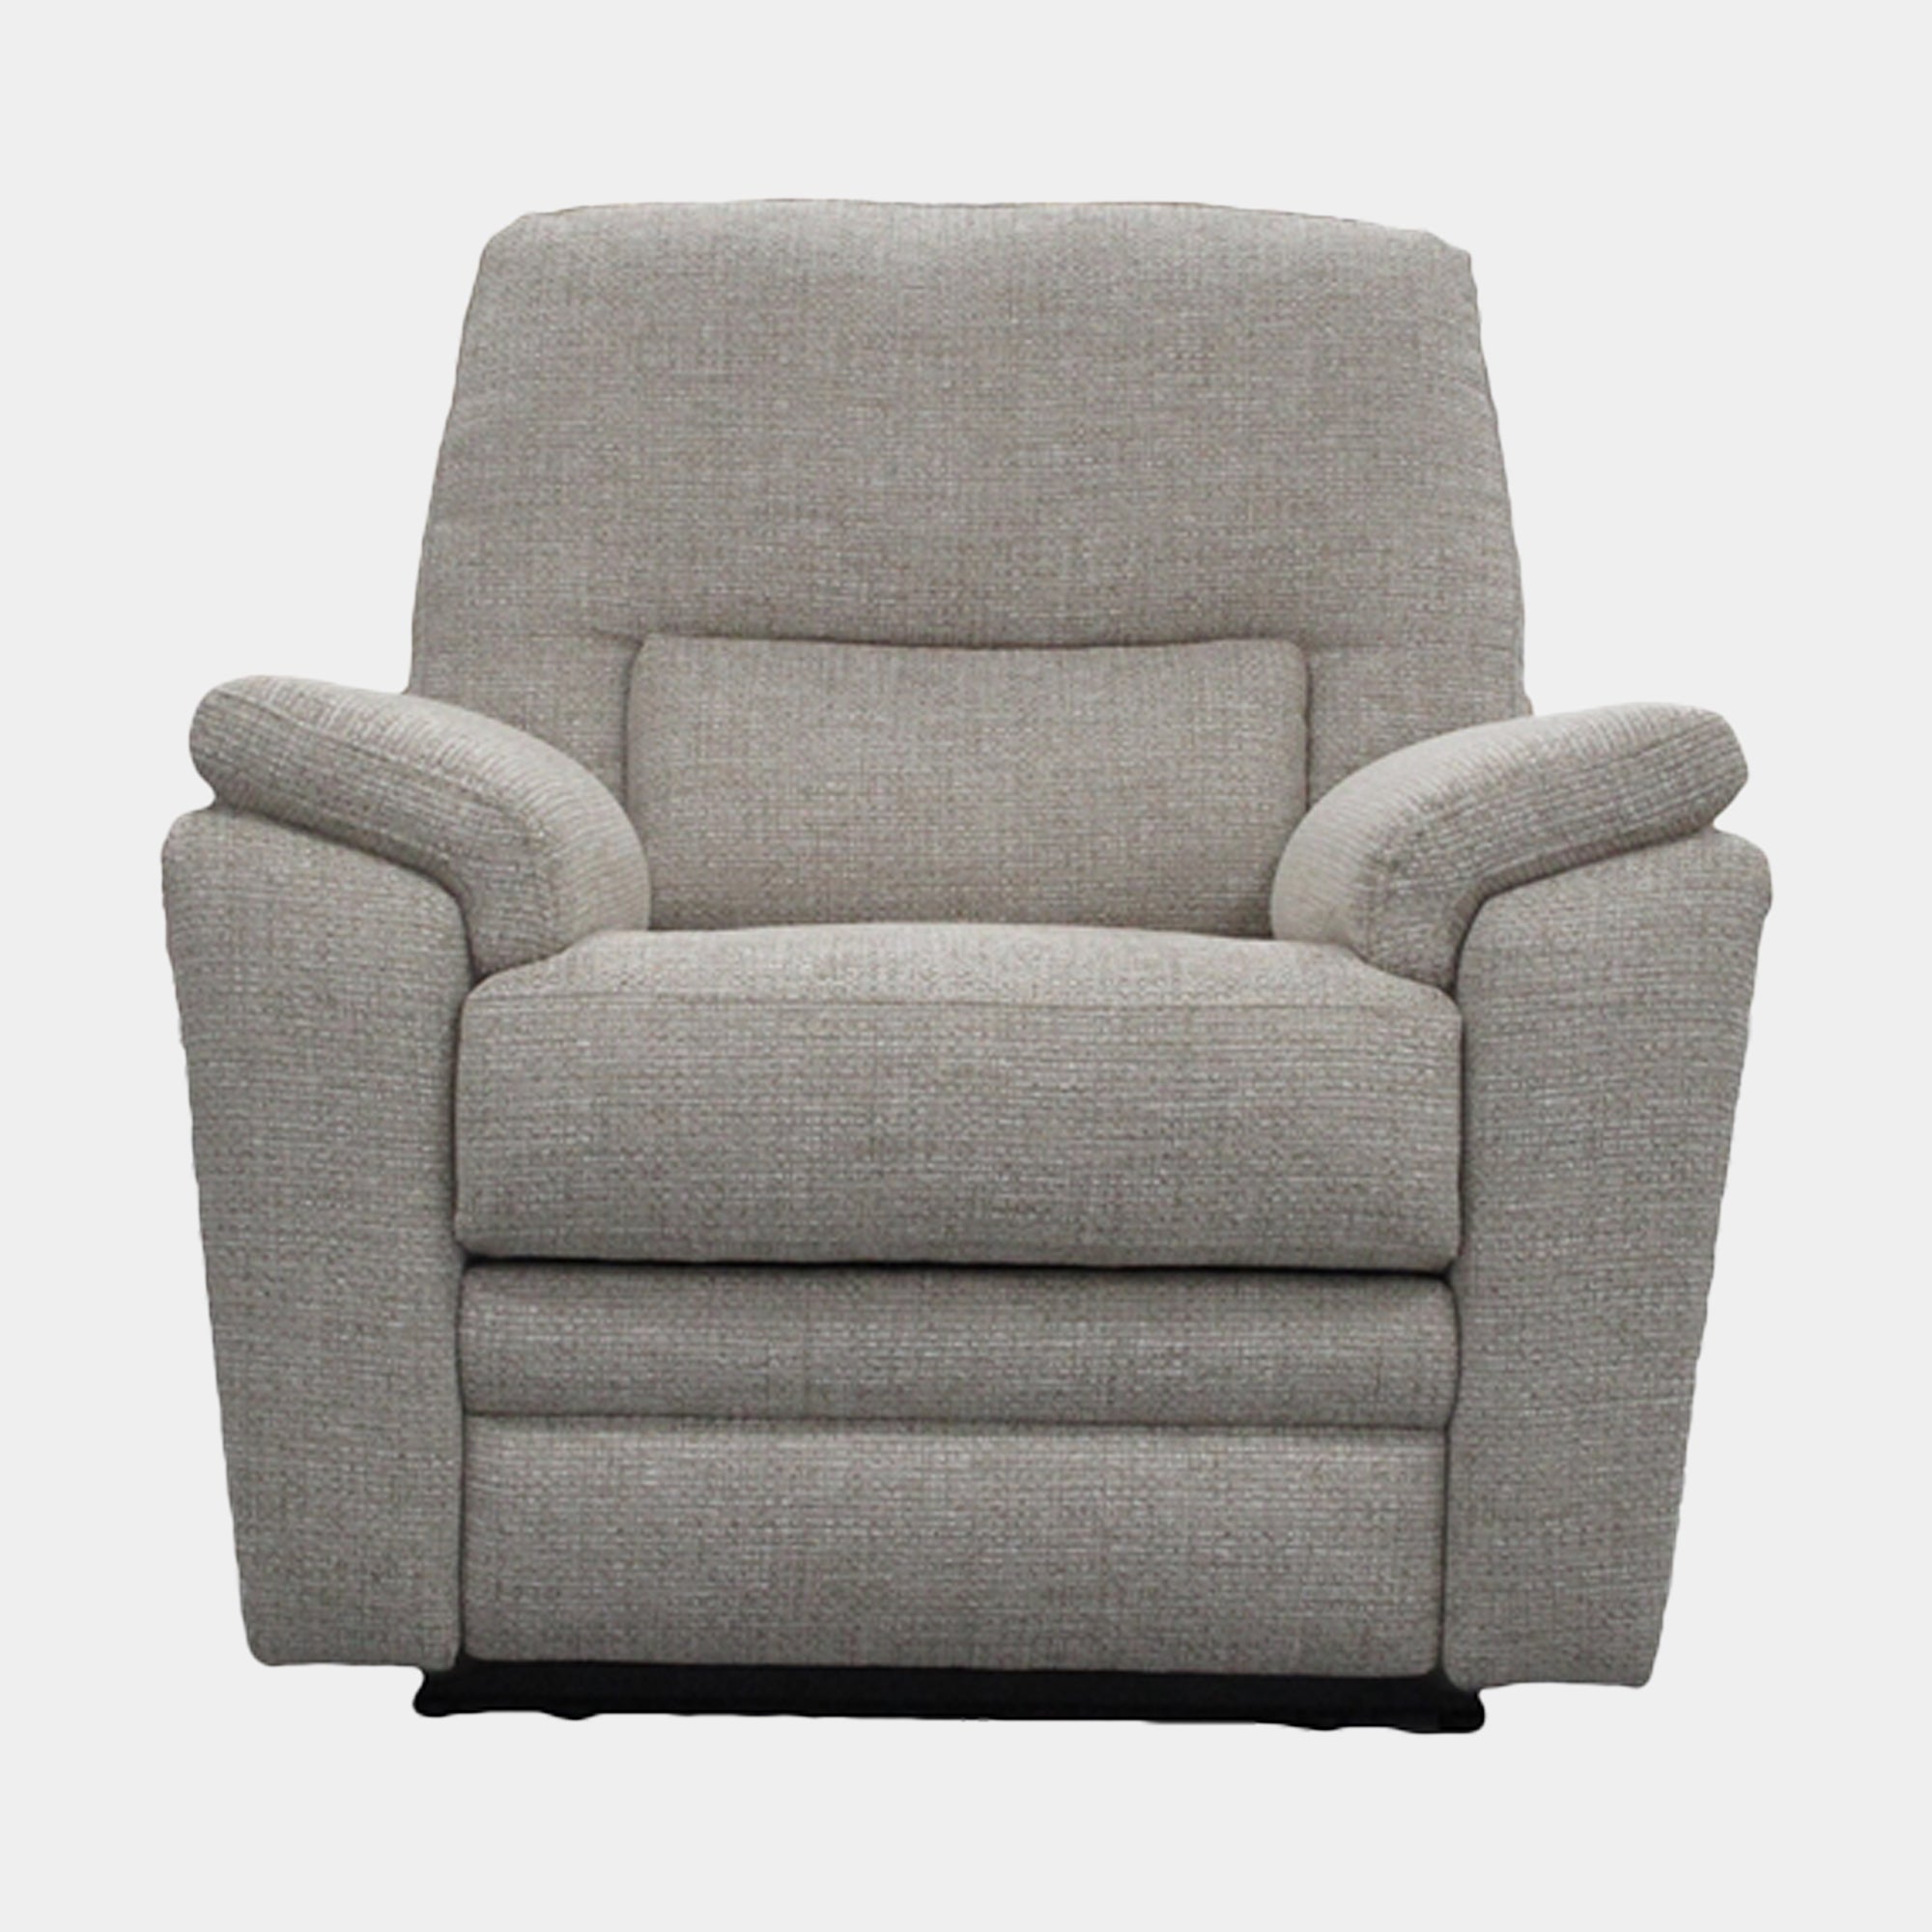 Armchair Manual Recliner With Lever Latch In Grade A Fabric